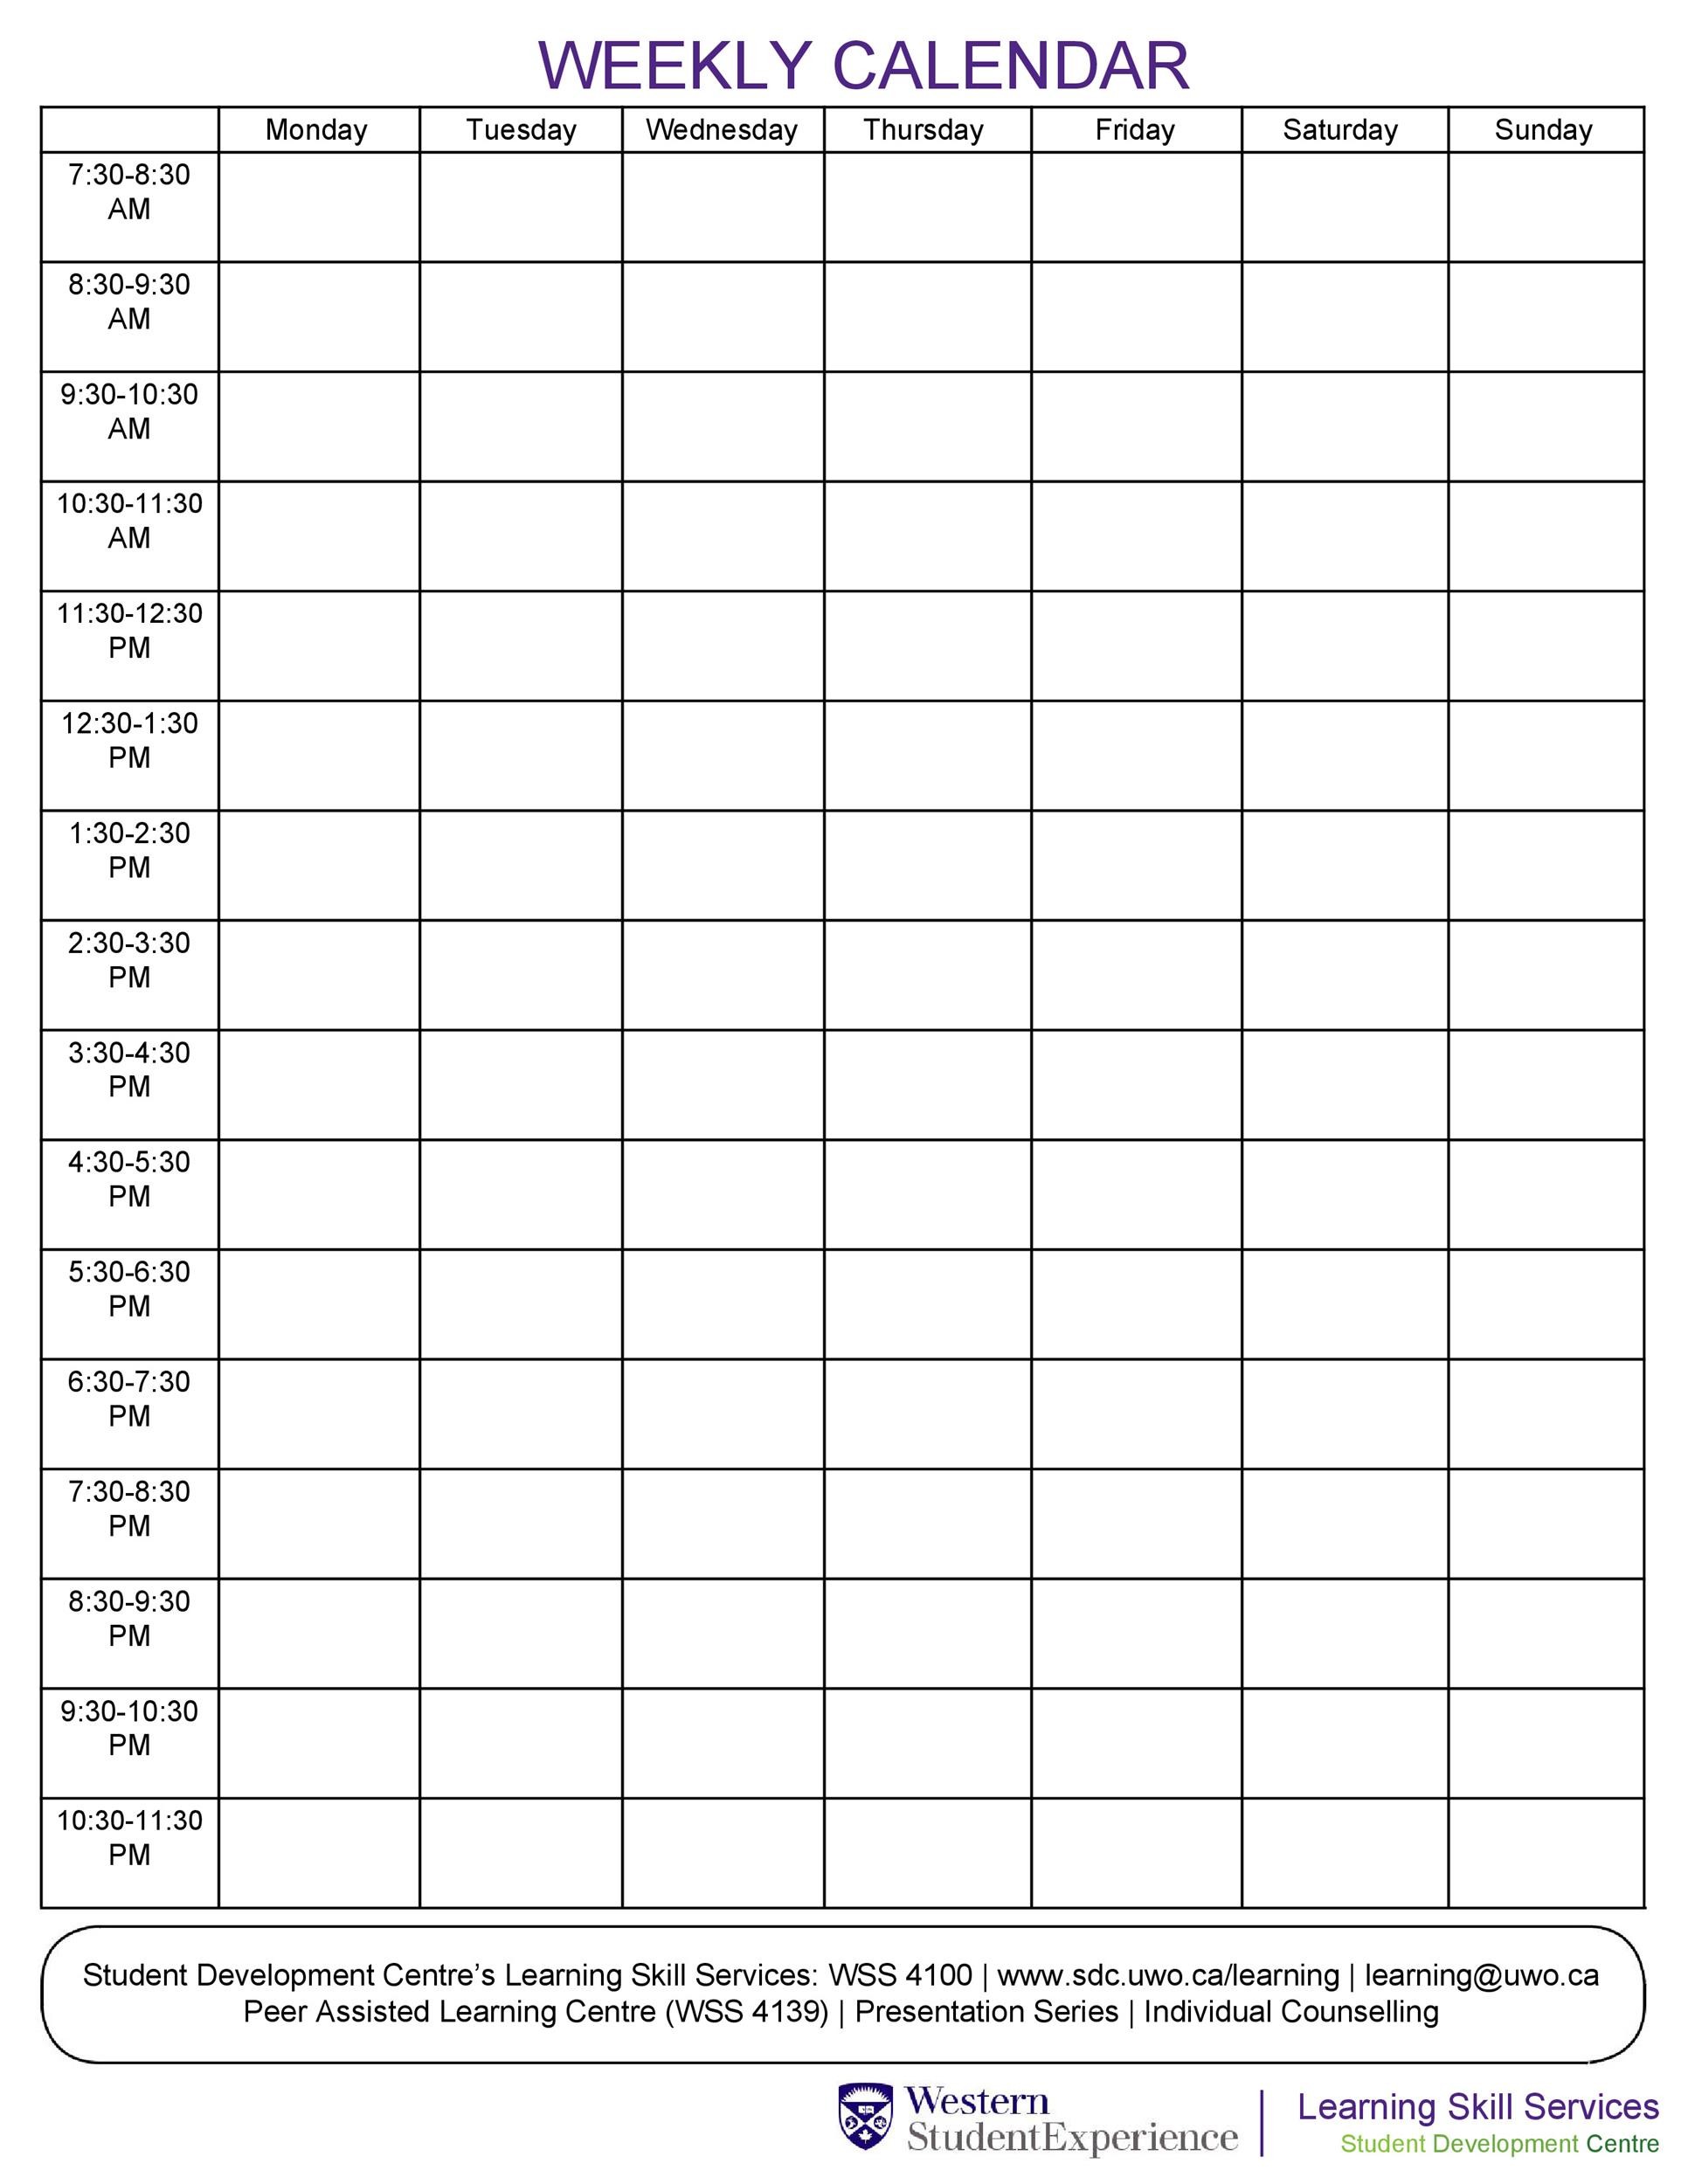 43 Effective Hourly Schedule Templates (Excel MS Word) ᐅ TemplateLab